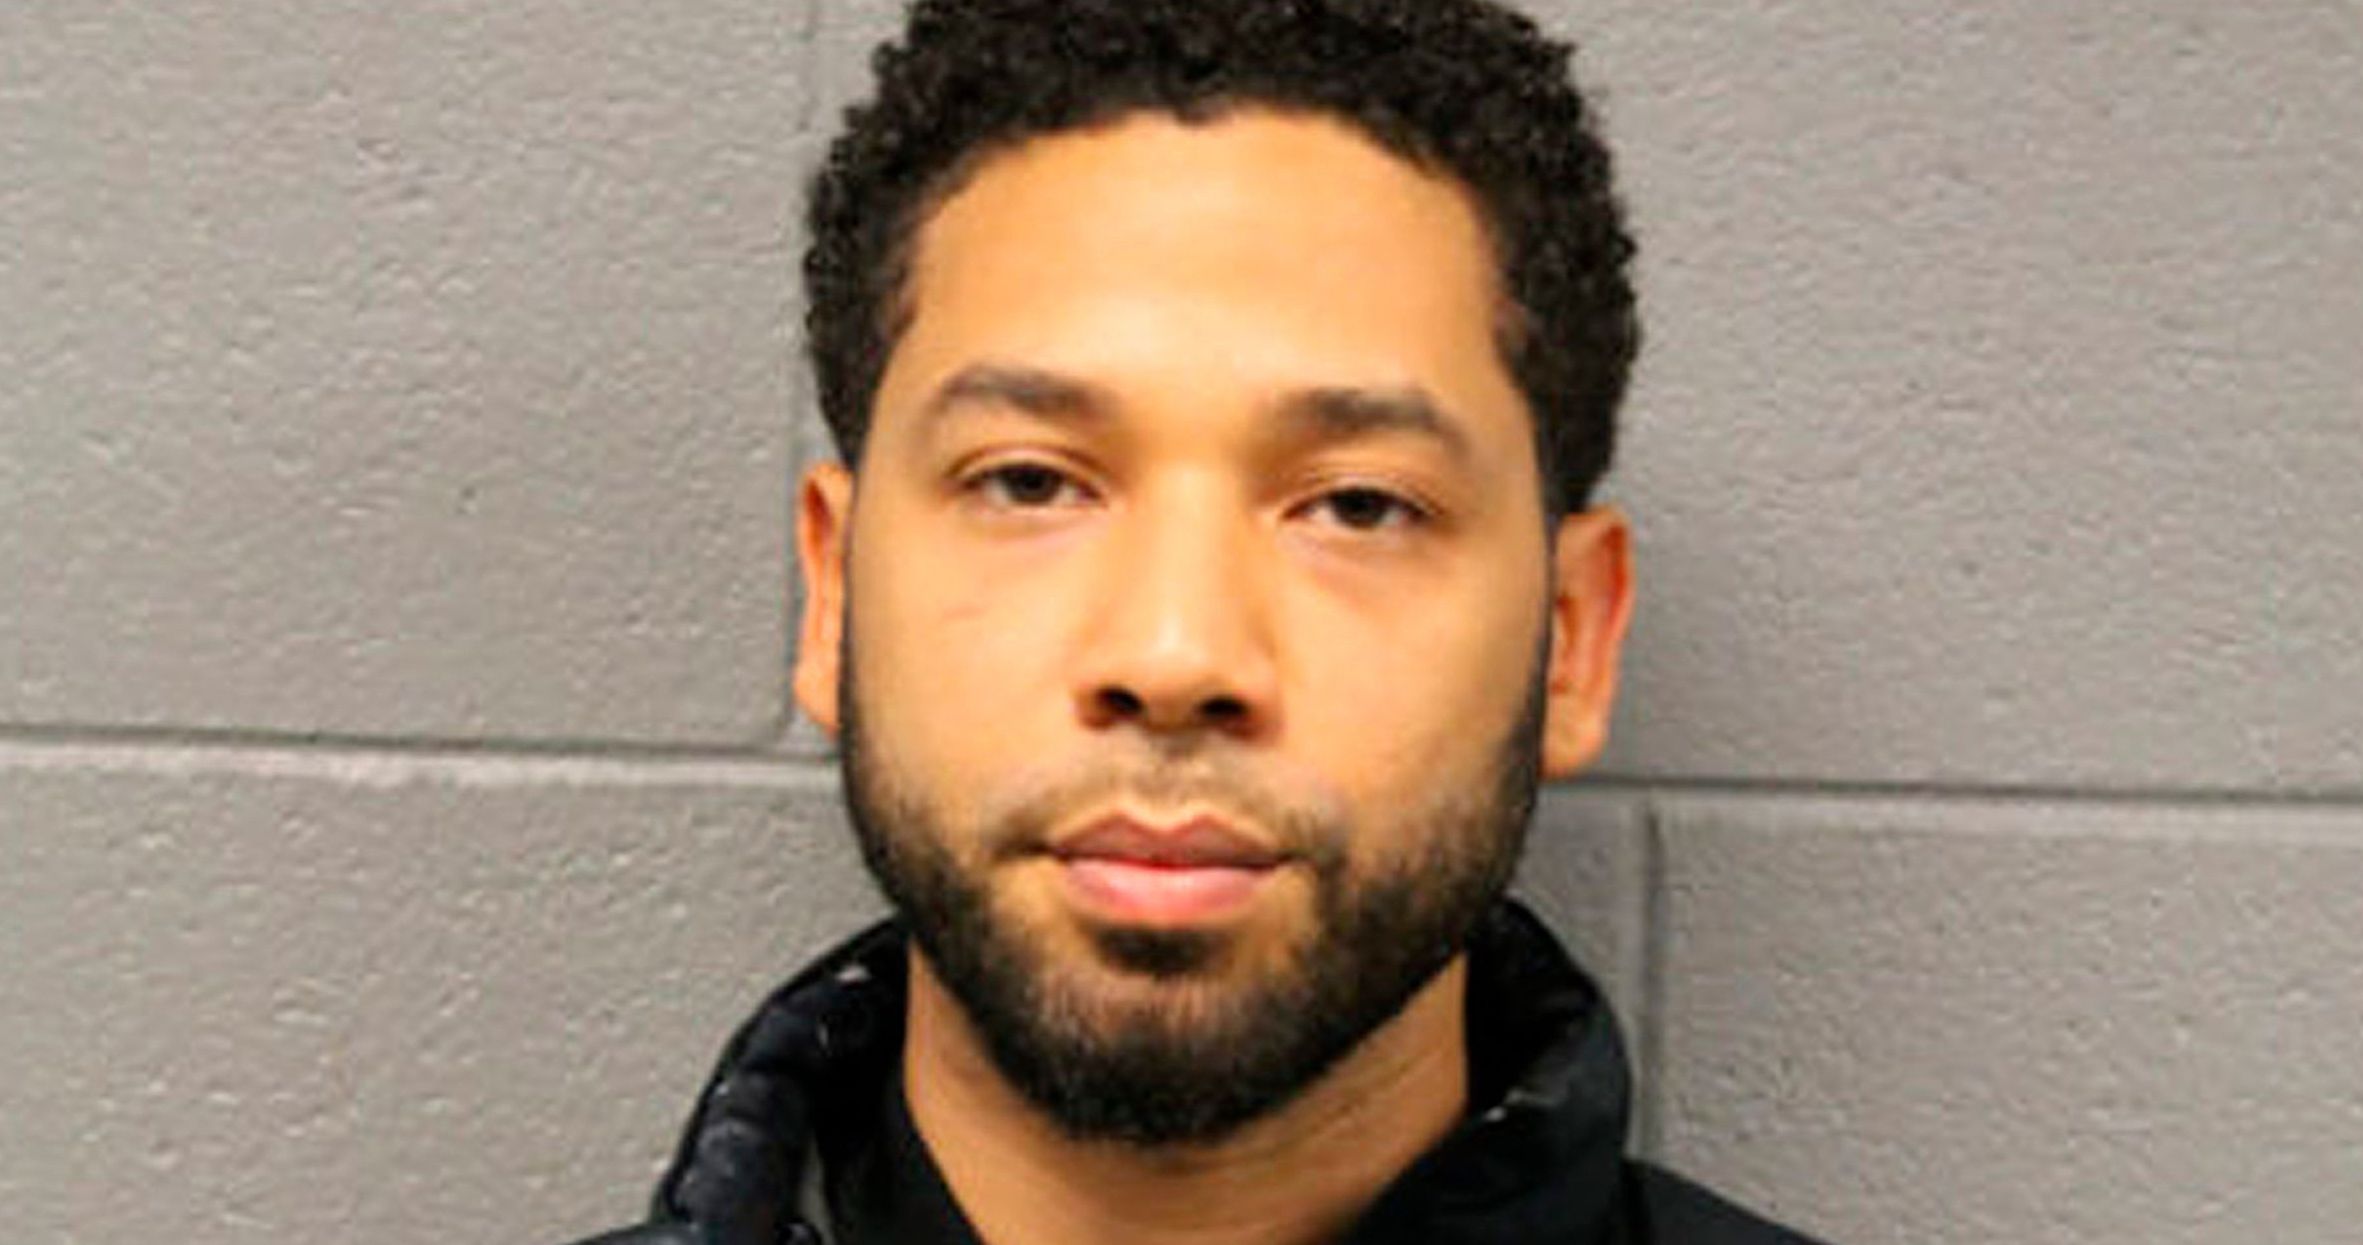 Jussie Smollett Files Counterclaim Against Chicago Police and Alleged Assailants